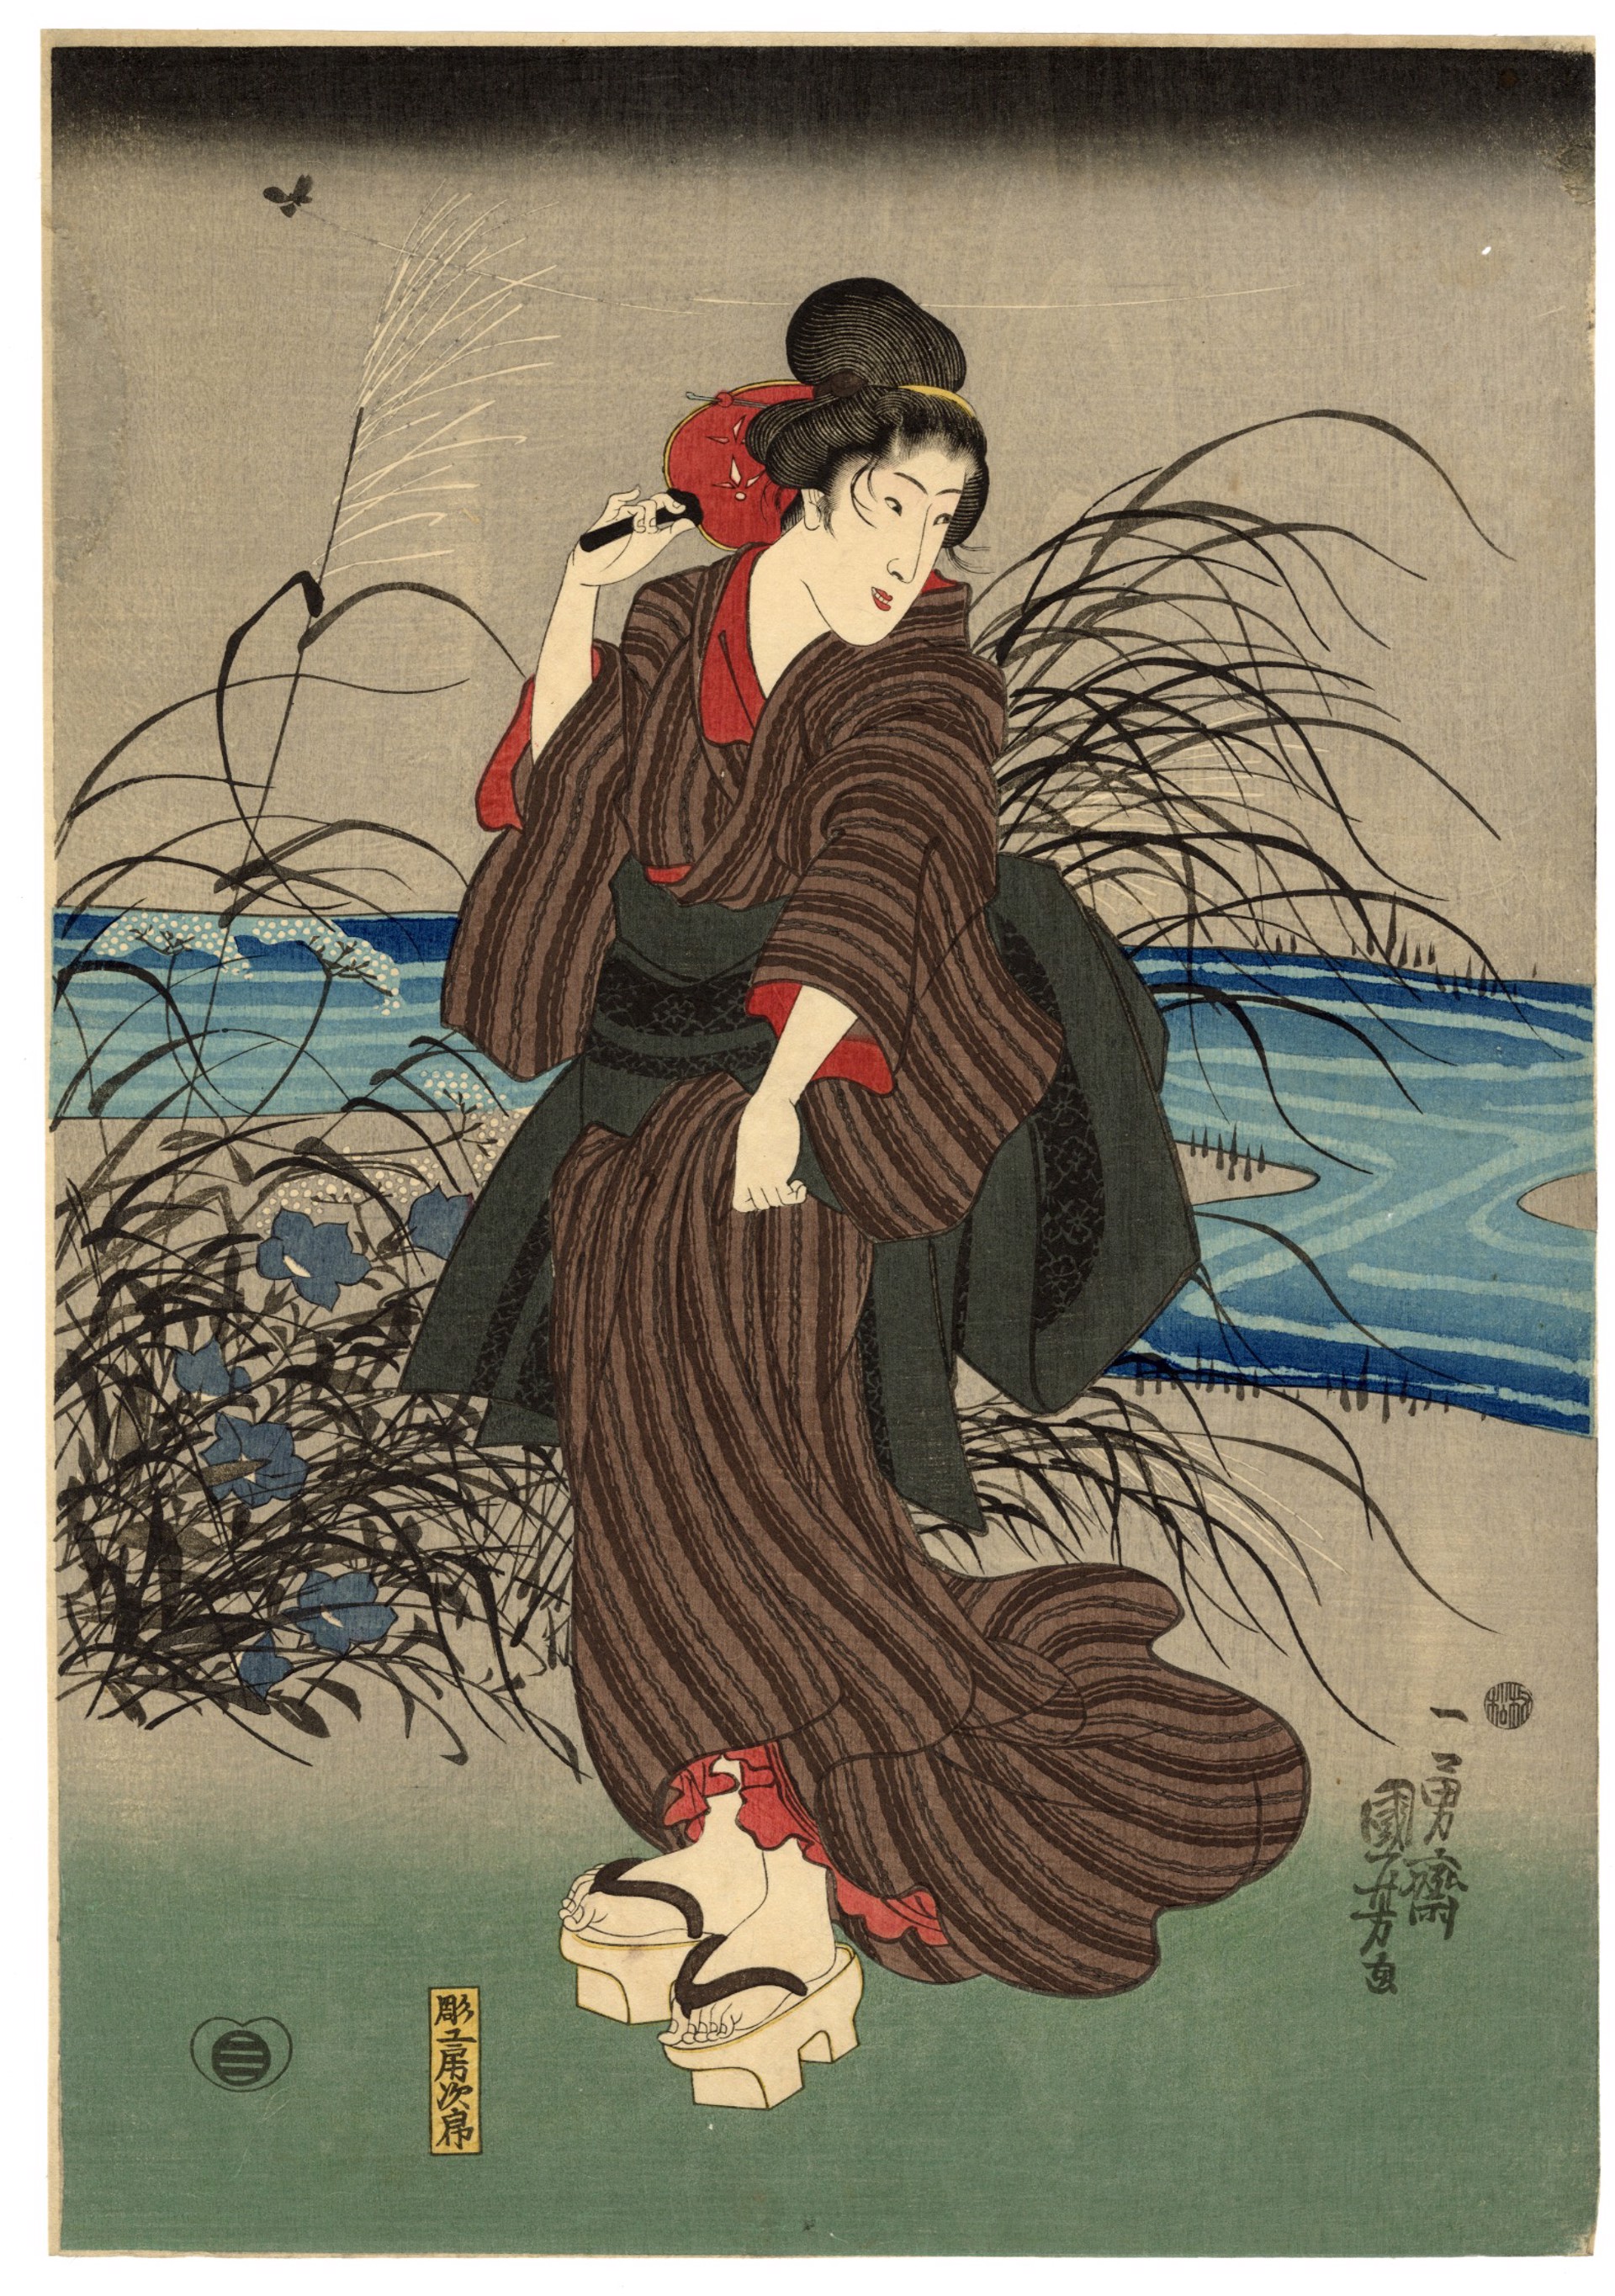 Autumn: Catching Fireflies in the Cool of the Evening by Kuniyoshi